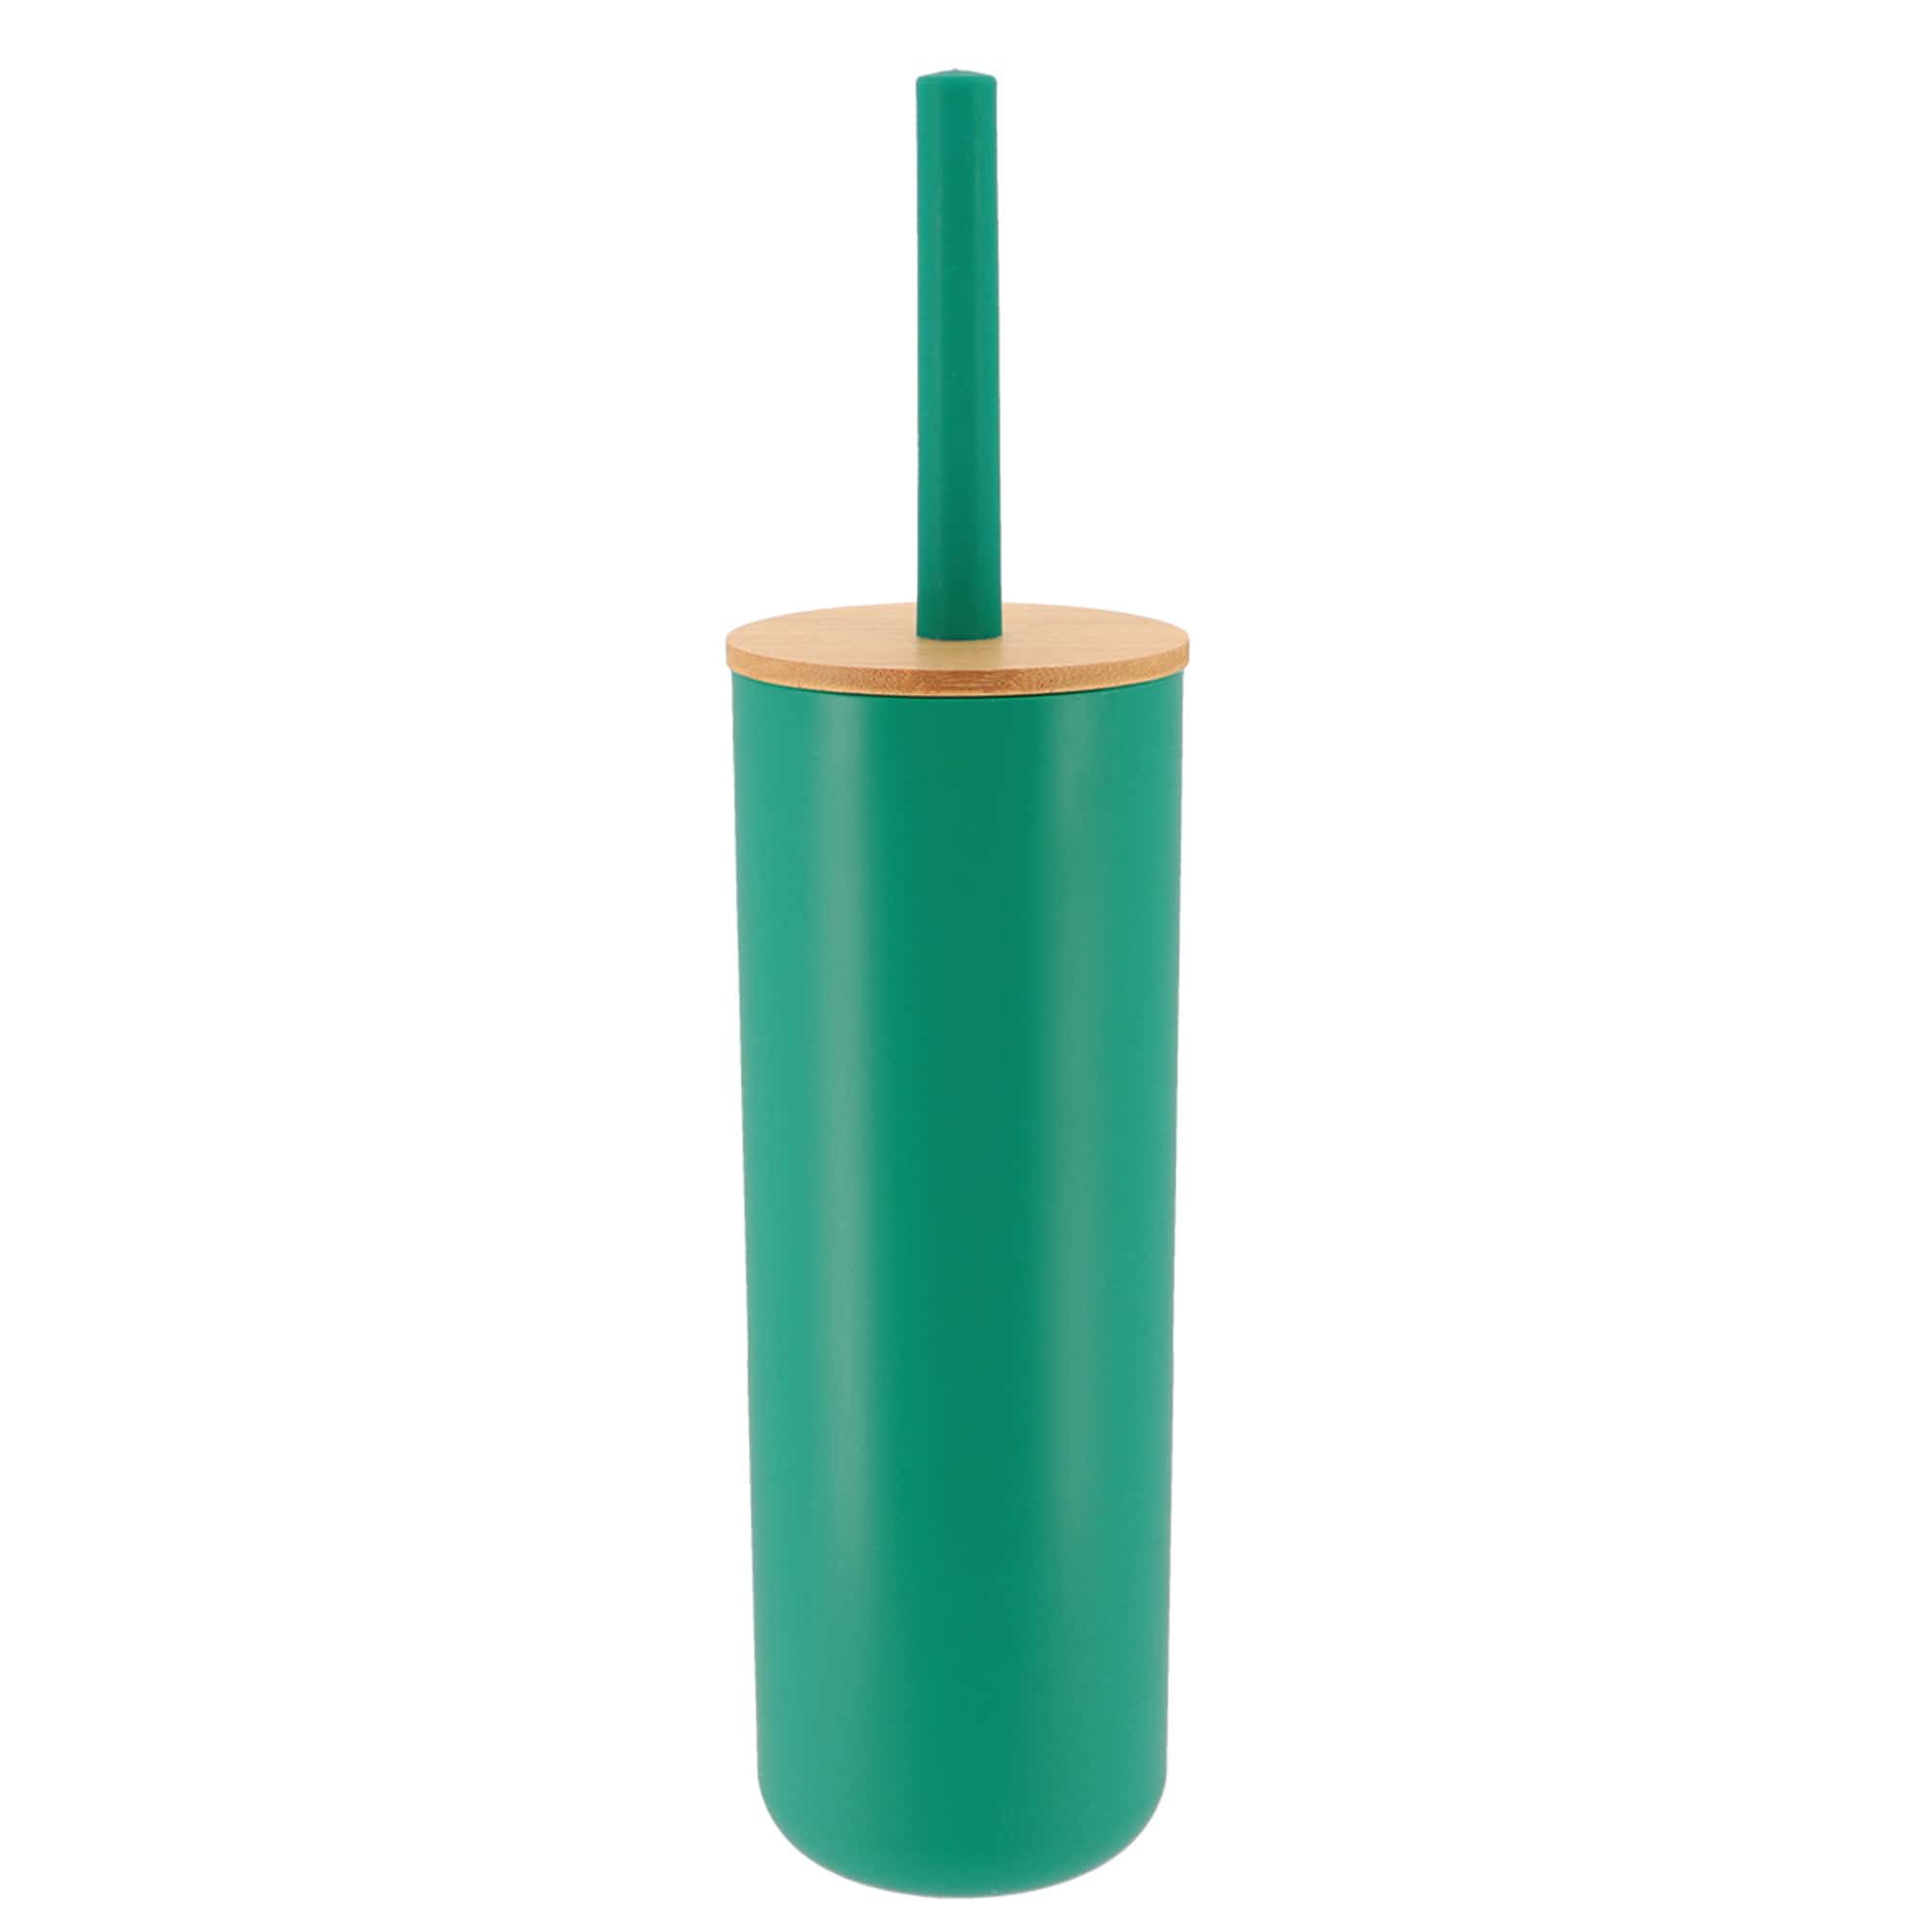 green and bamboo toilet brush and holder set